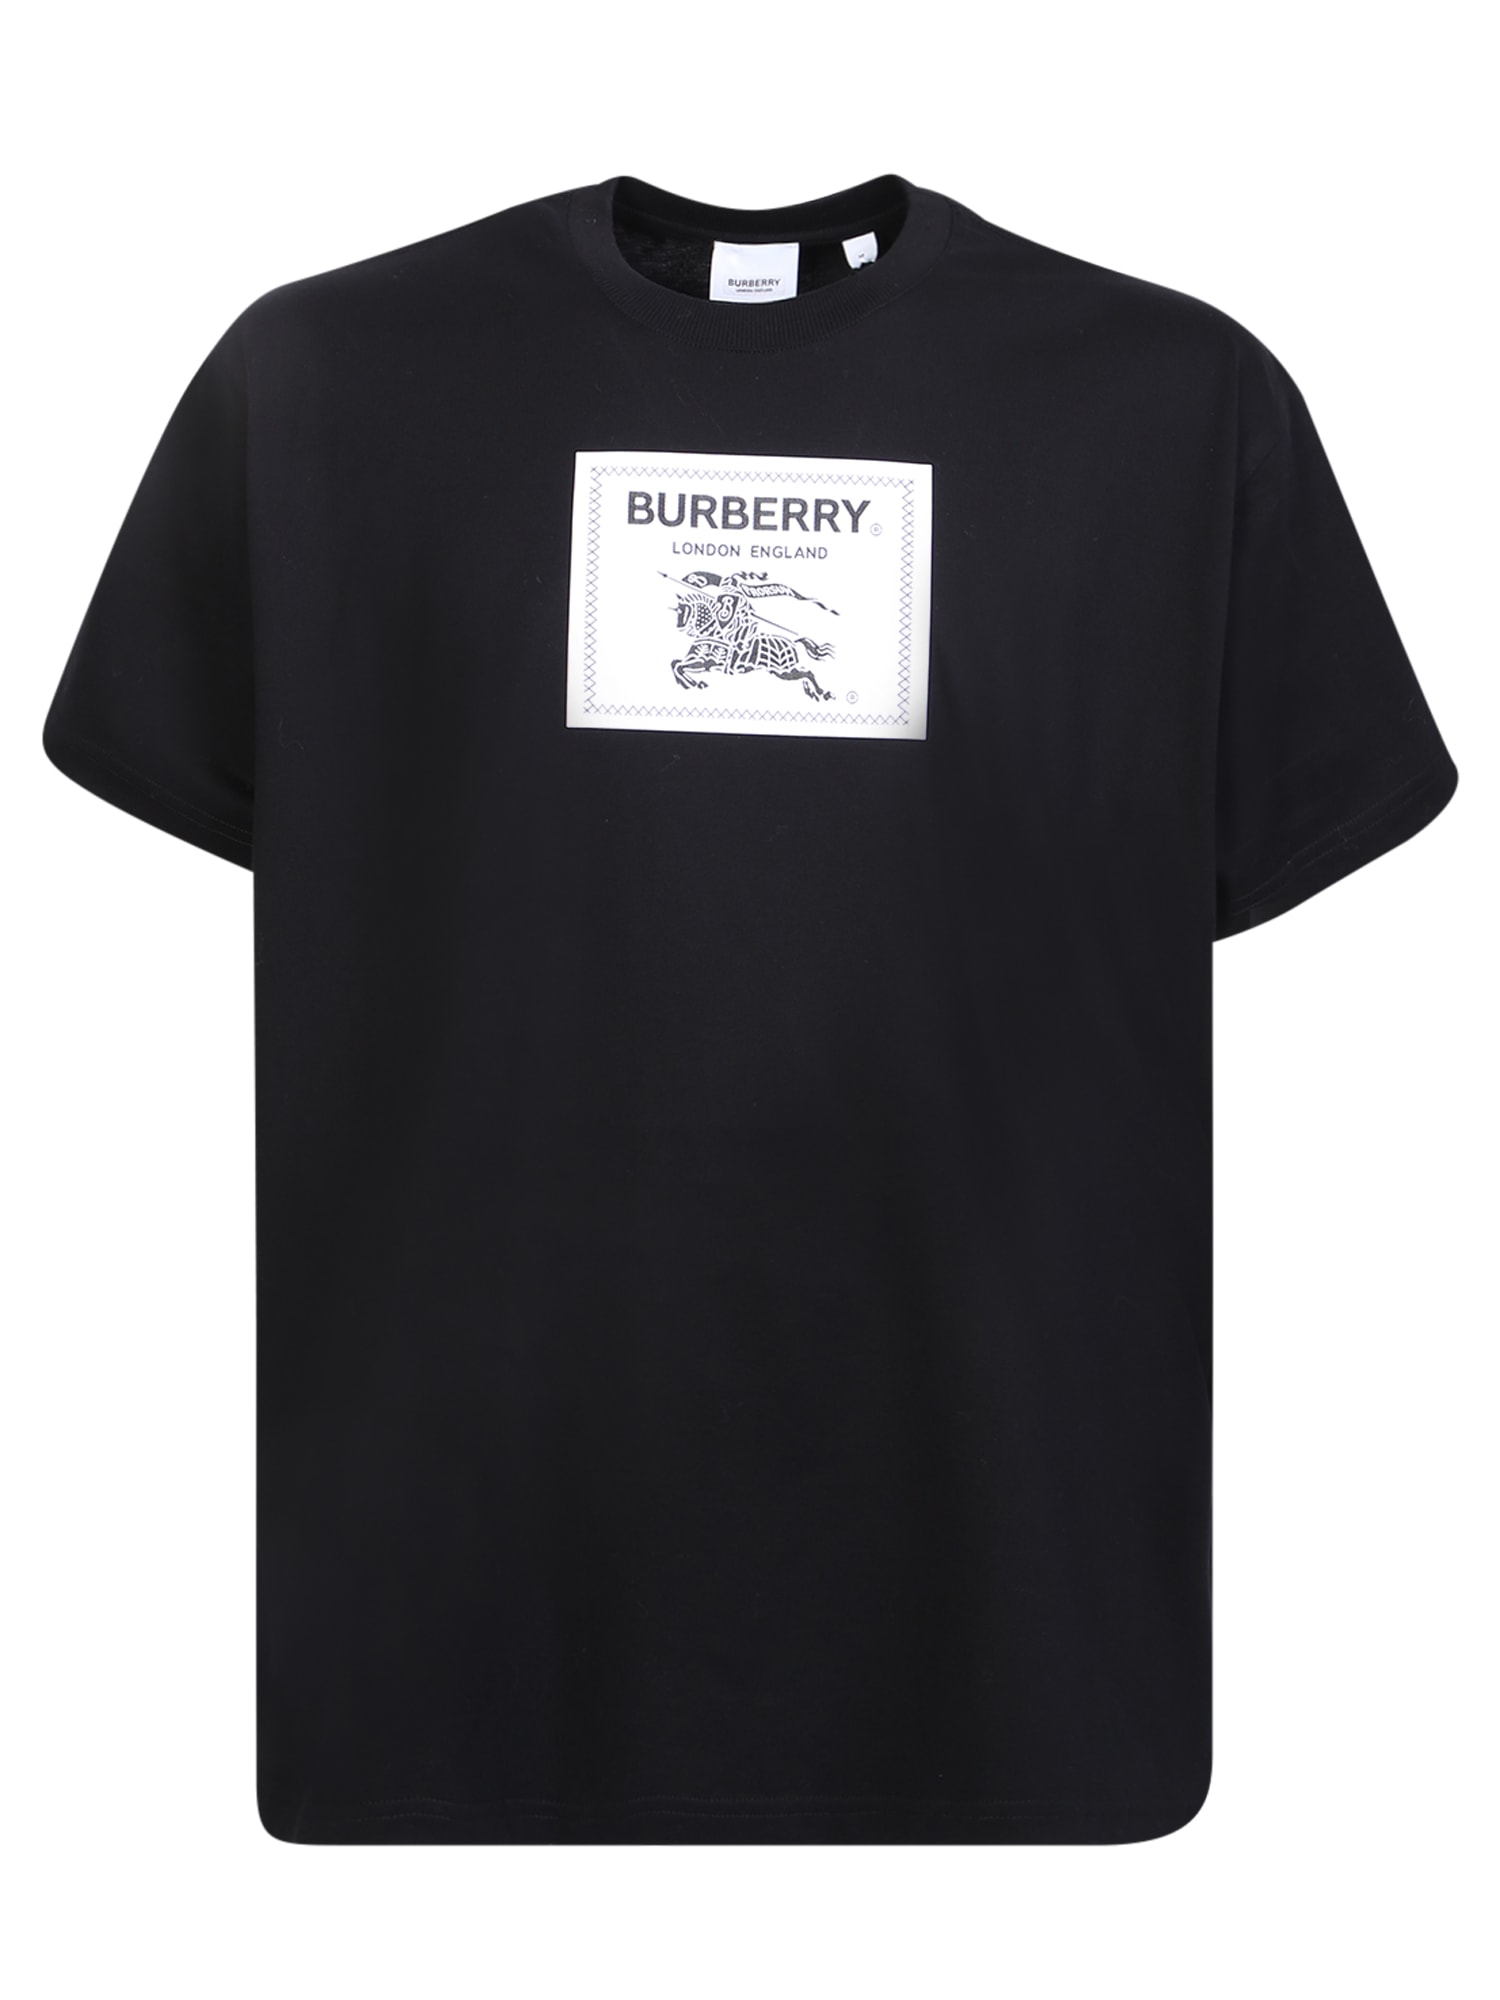 BURBERRY T-SHIRT WITH EQUESTRIAN RIDER APPLICATION